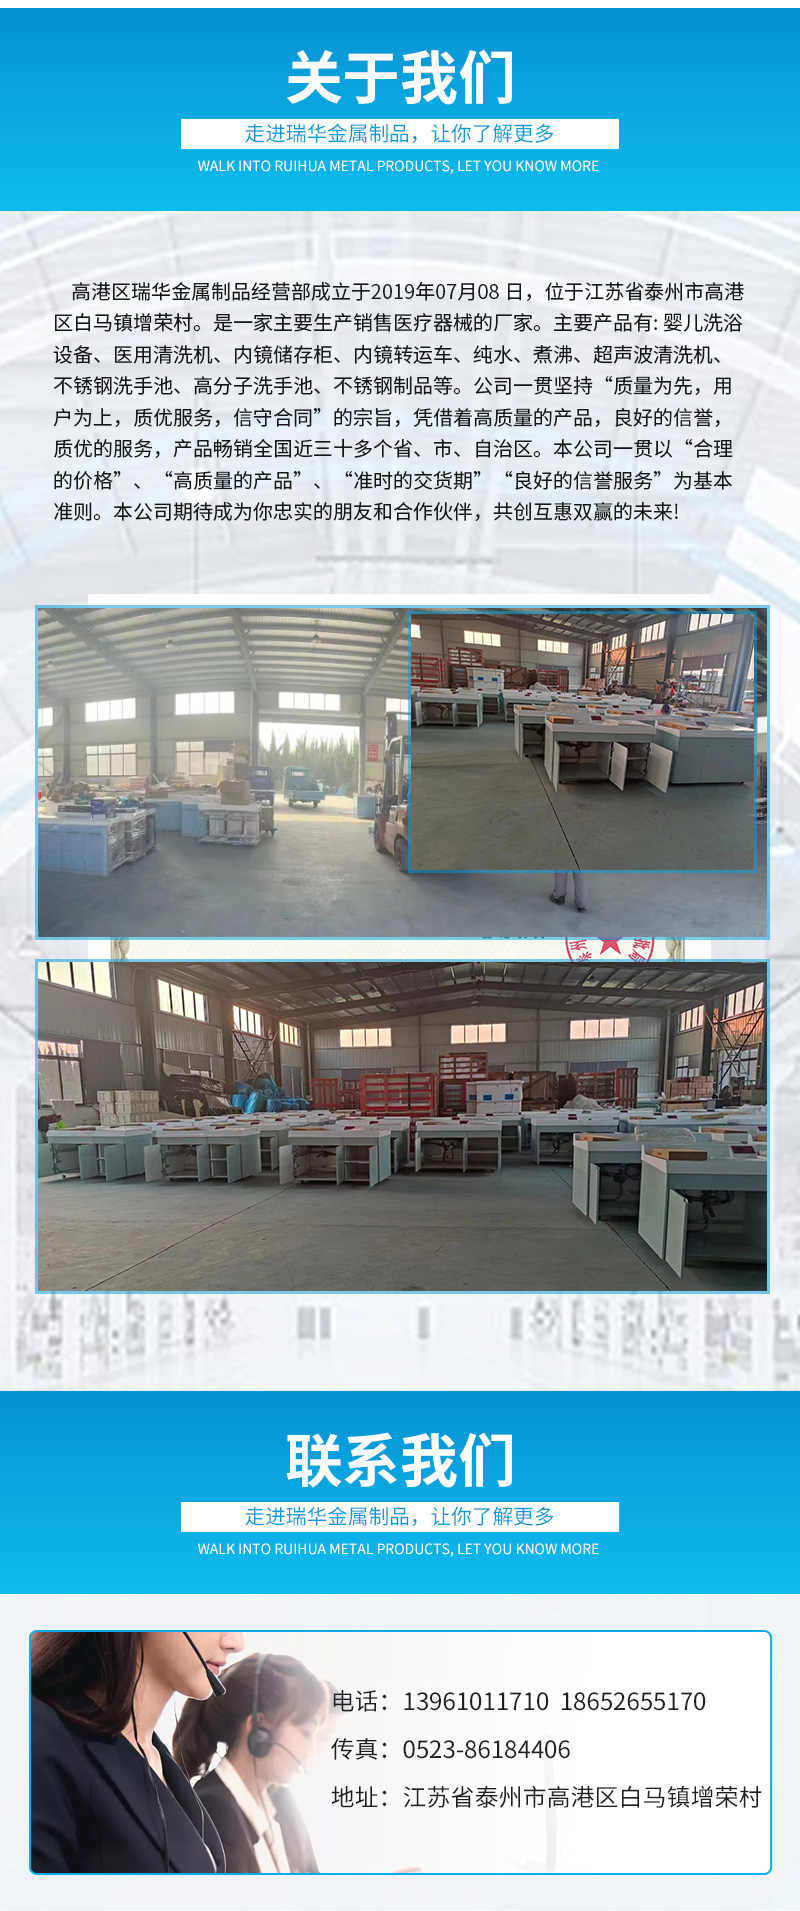 Integrated design of ultrasonic cleaning machine, vertical embedded cleaning equipment